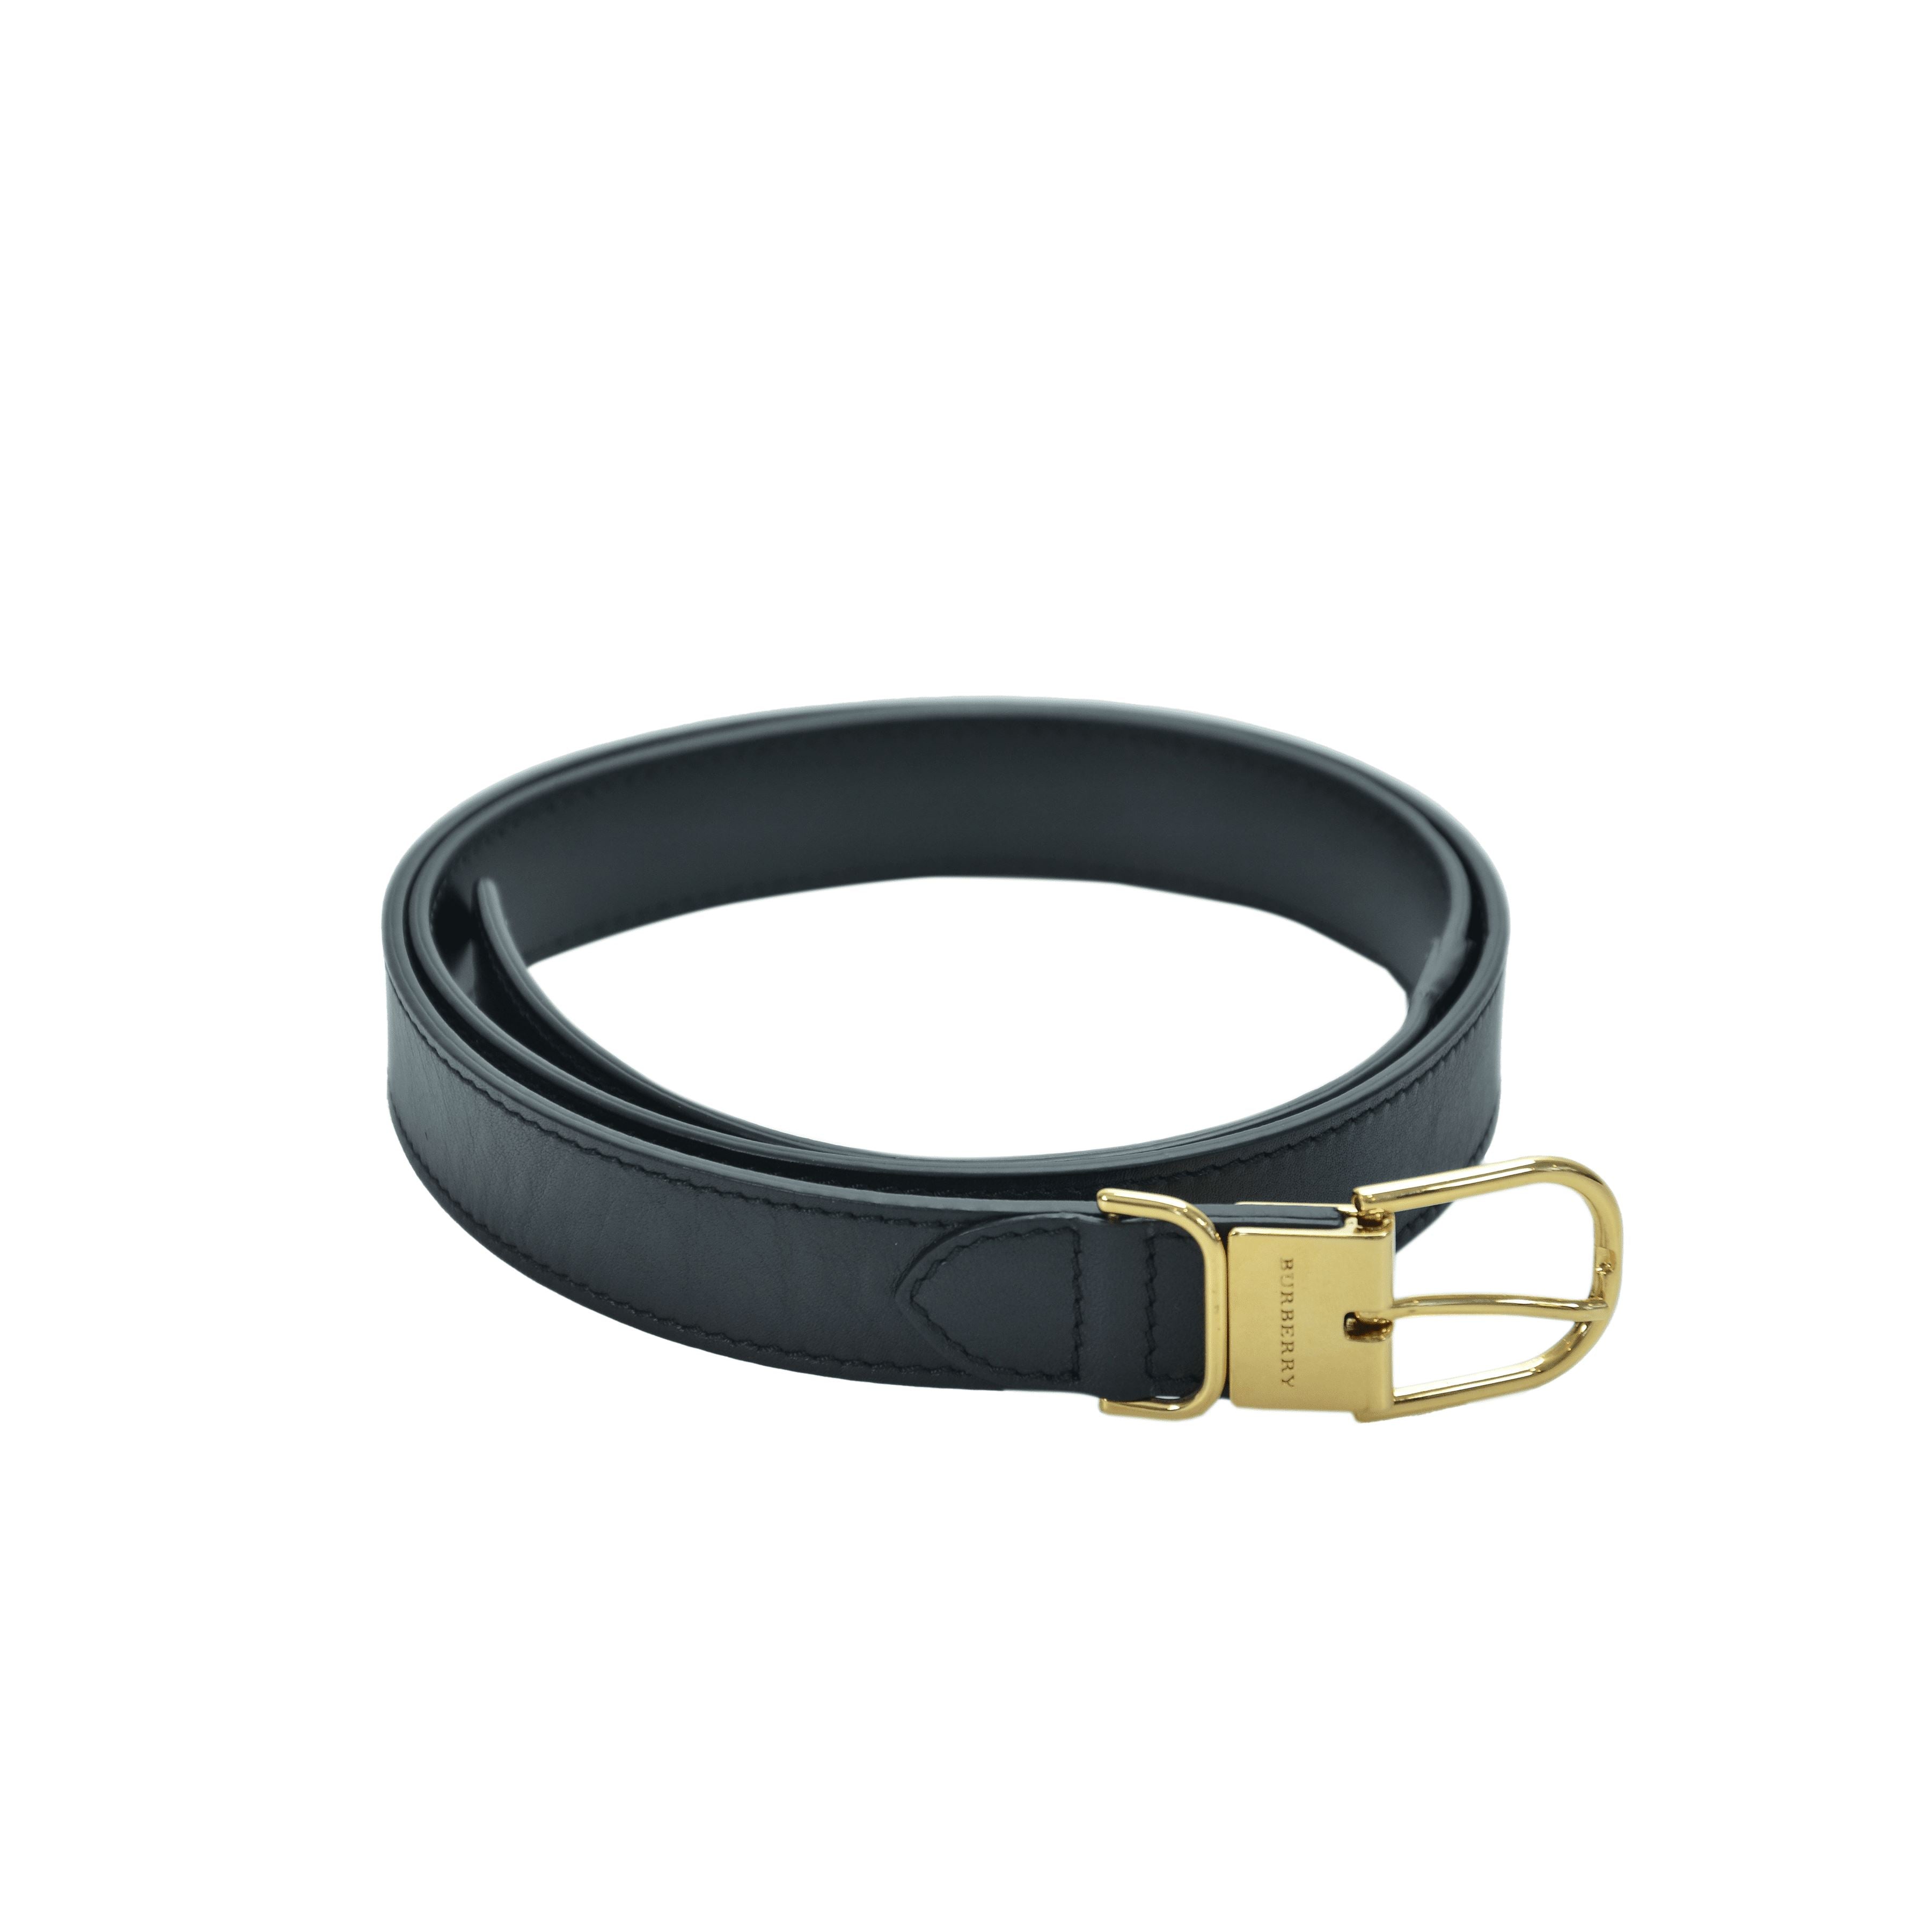 Burberry Black Leather Belt With Gold Buckle Accessories Burberry 